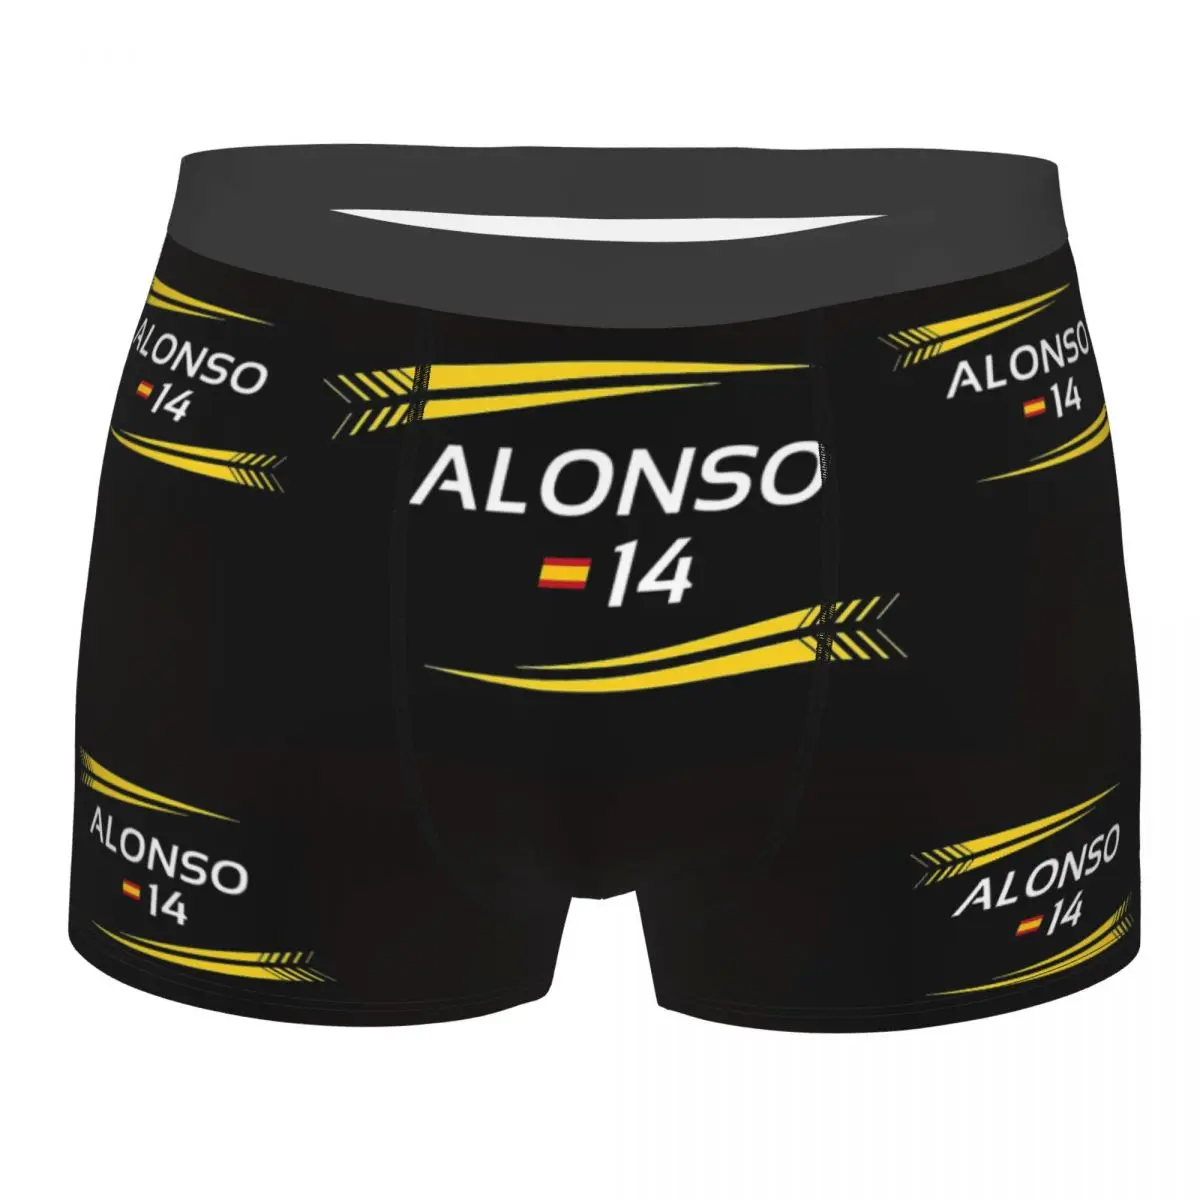 F1 2021 - 14 Alonso Black Version Classic Men Boxer Briefs Underpants Highly Breathable High Quality Gift Idea